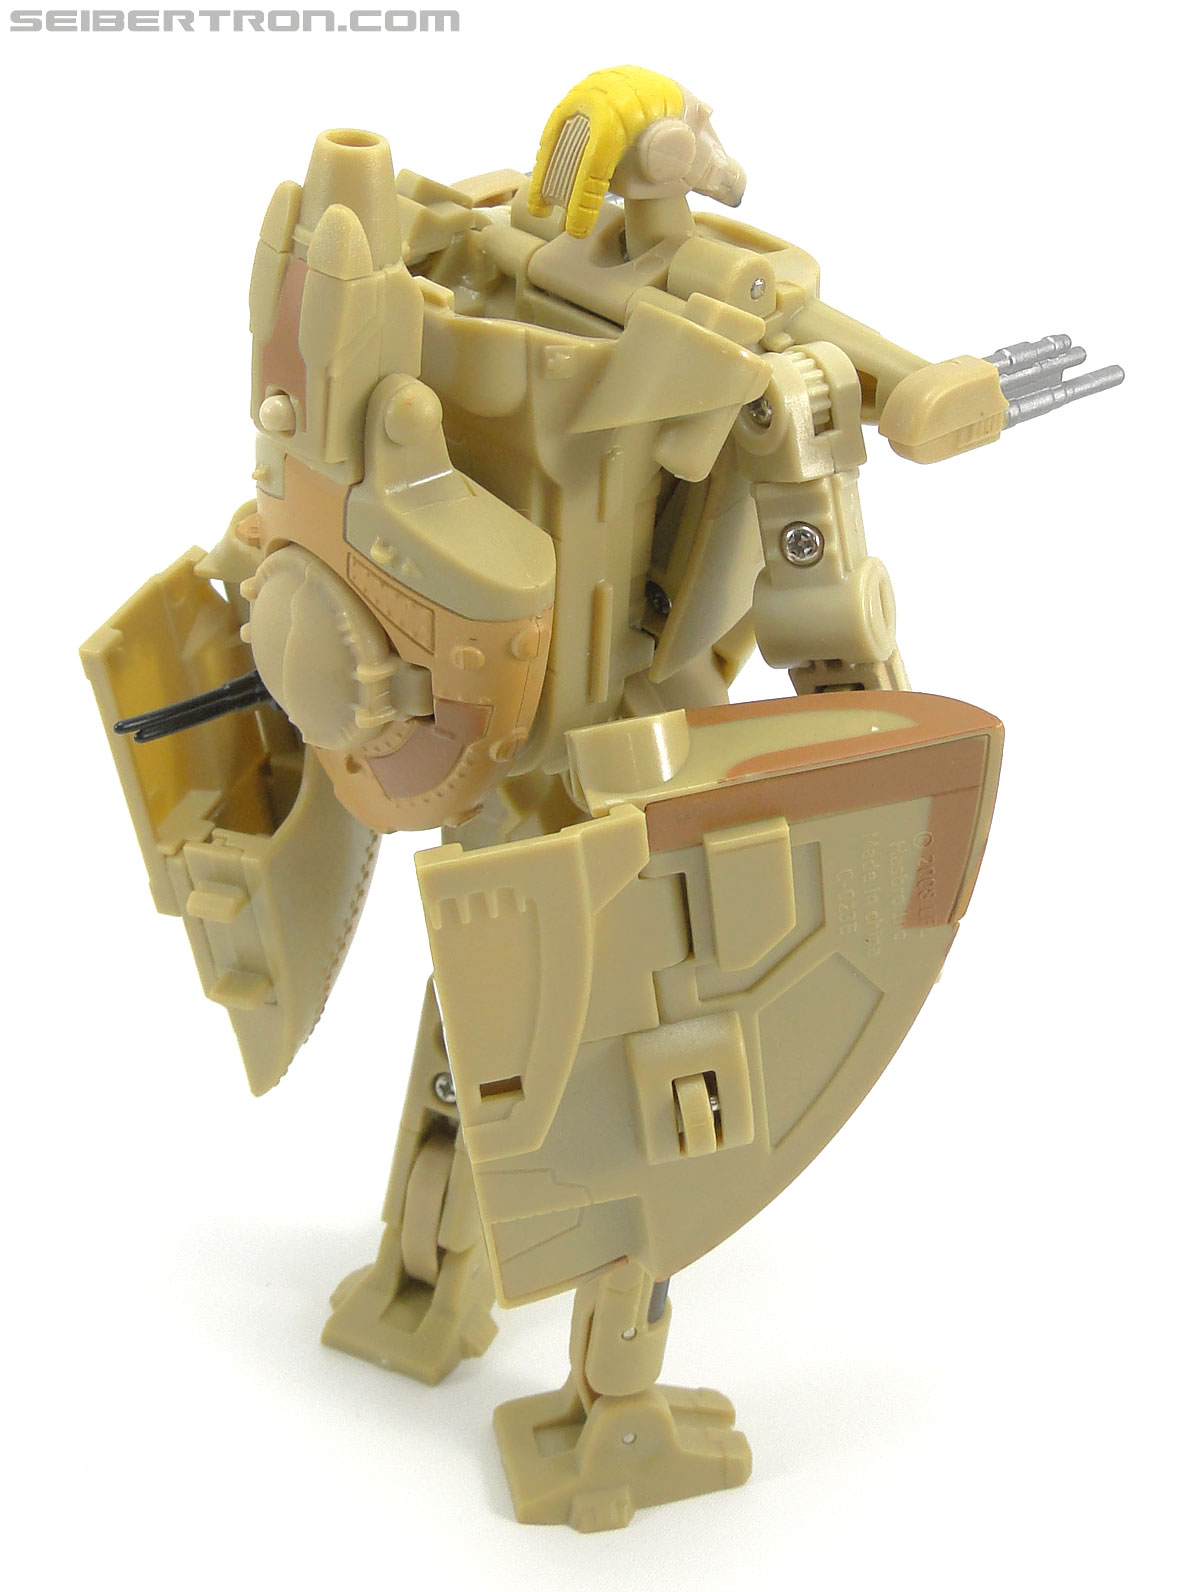 Star Wars Transformers Battle Droid Commader (Armored Assault Tank) (Battle Droid Commader) (Image #43 of 85)